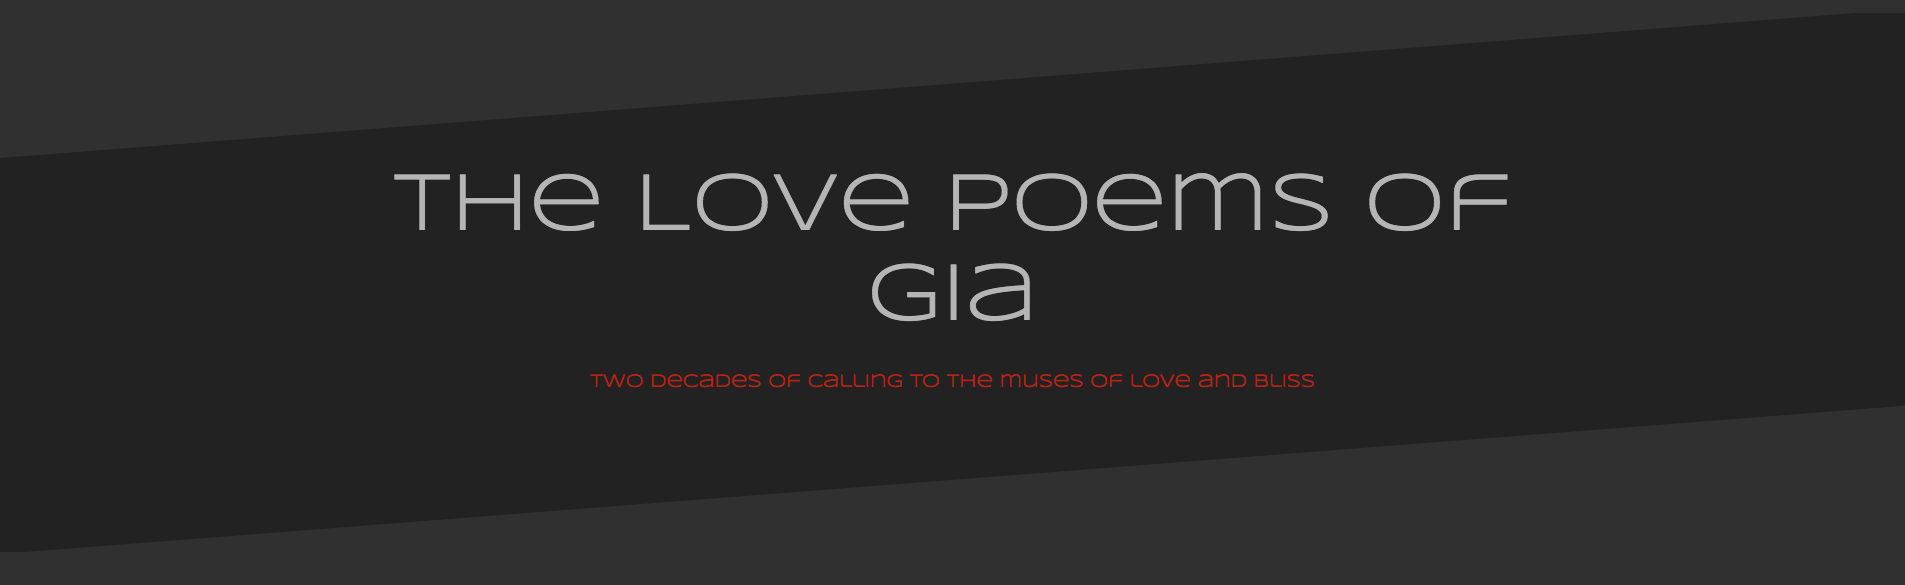 The Love Poems of Gia